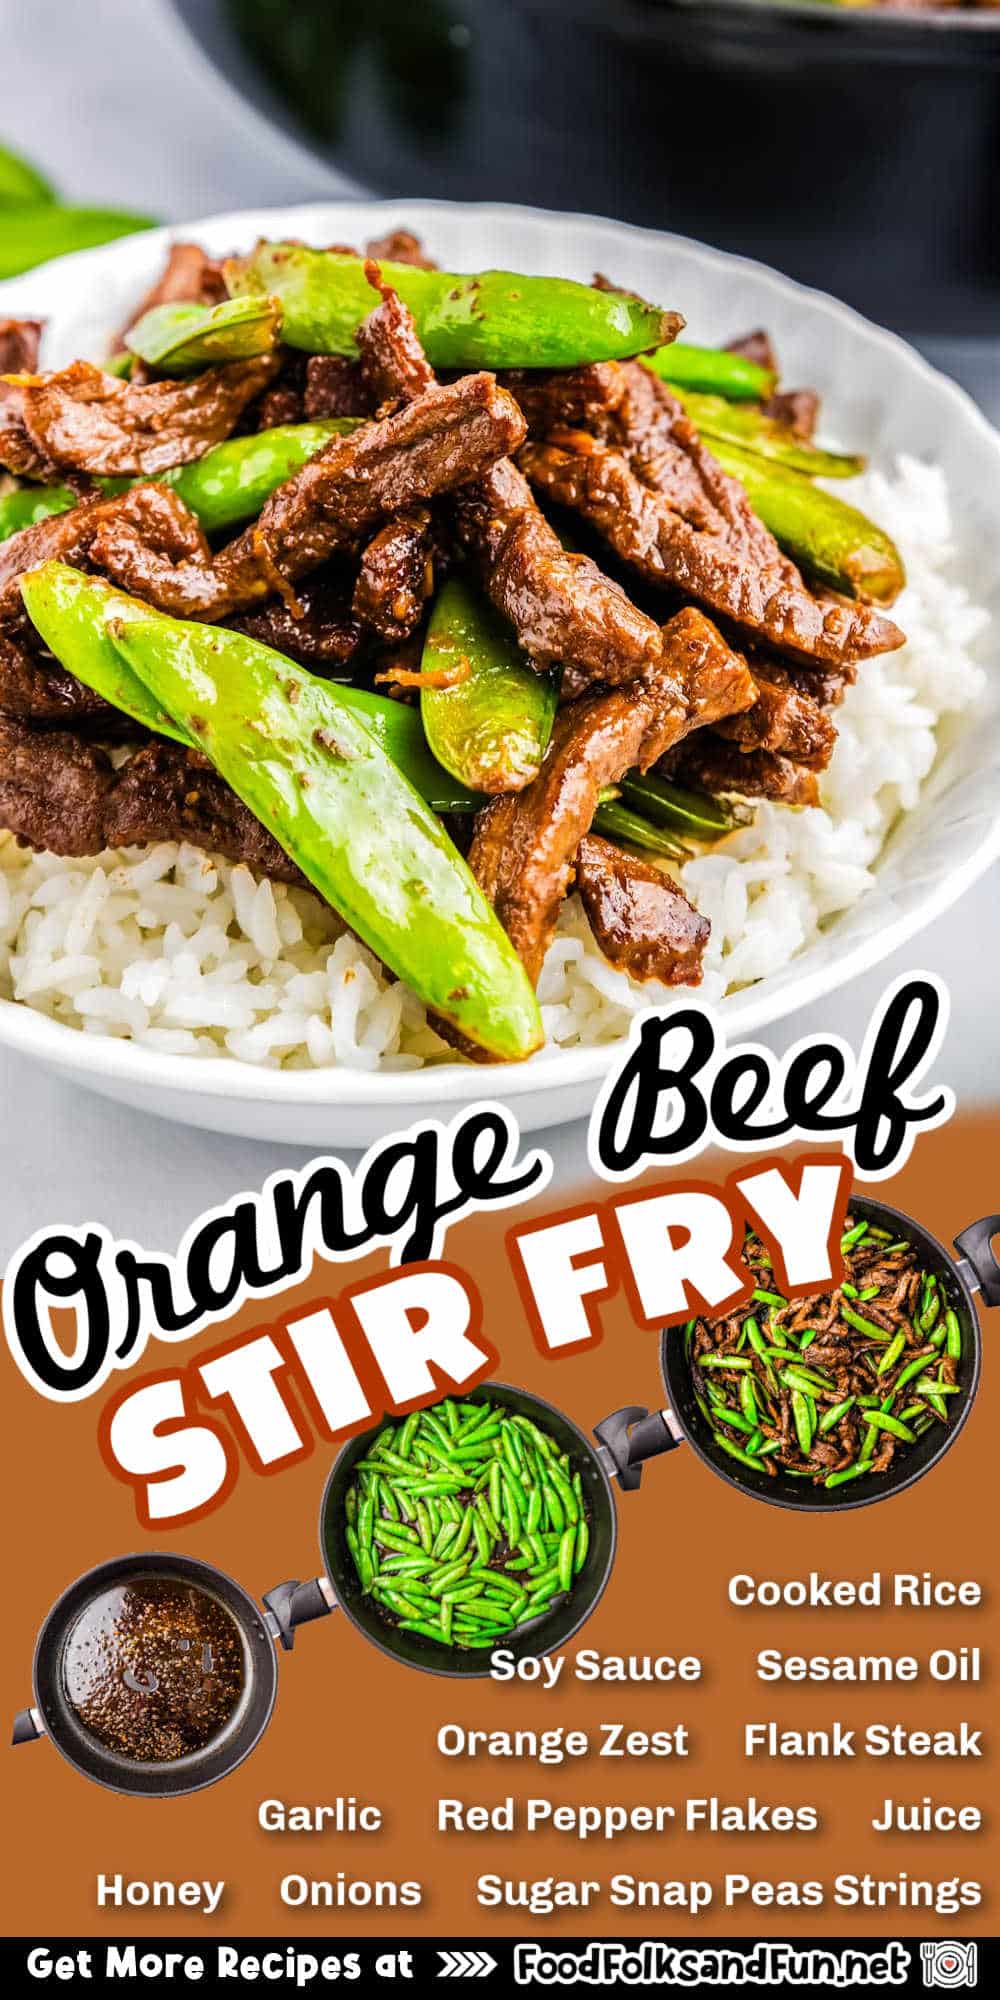 Spice up your weeknights with this slightly spicy sweet orange beef! Tender beef gets caramelized in a vibrant sauce, all tossed with crisp sugar snap peas. Ready in a flash, it's a flavor that won't wait for the weekend. via @foodfolksandfun